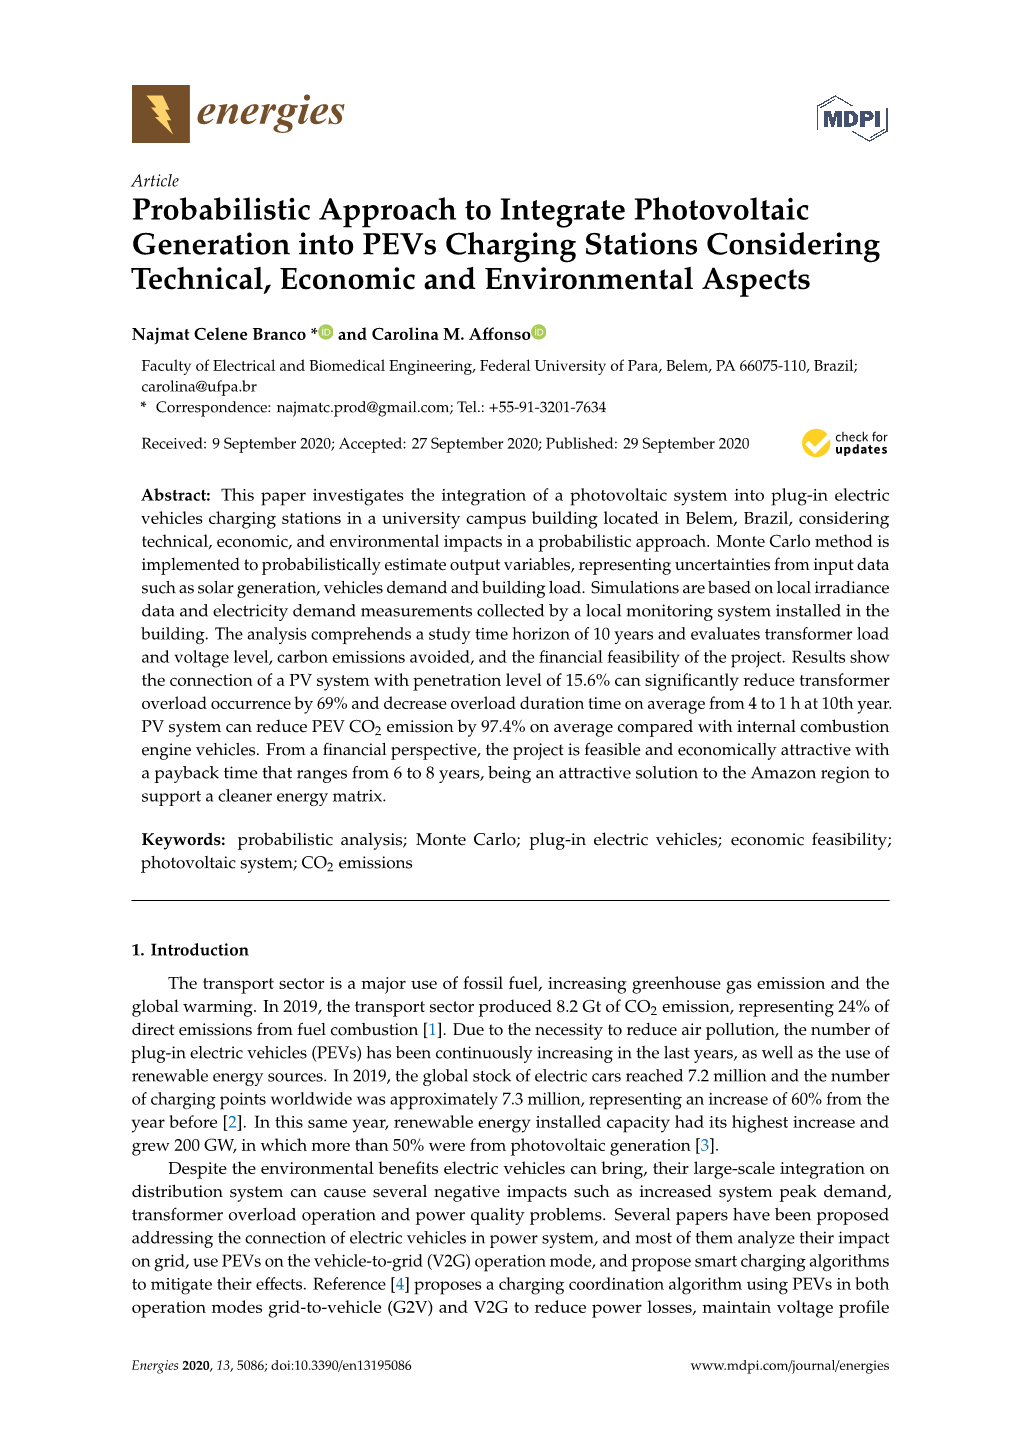 Probabilistic Approach to Integrate Photovoltaic Generation Into Pevs Charging Stations Considering Technical, Economic and Environmental Aspects